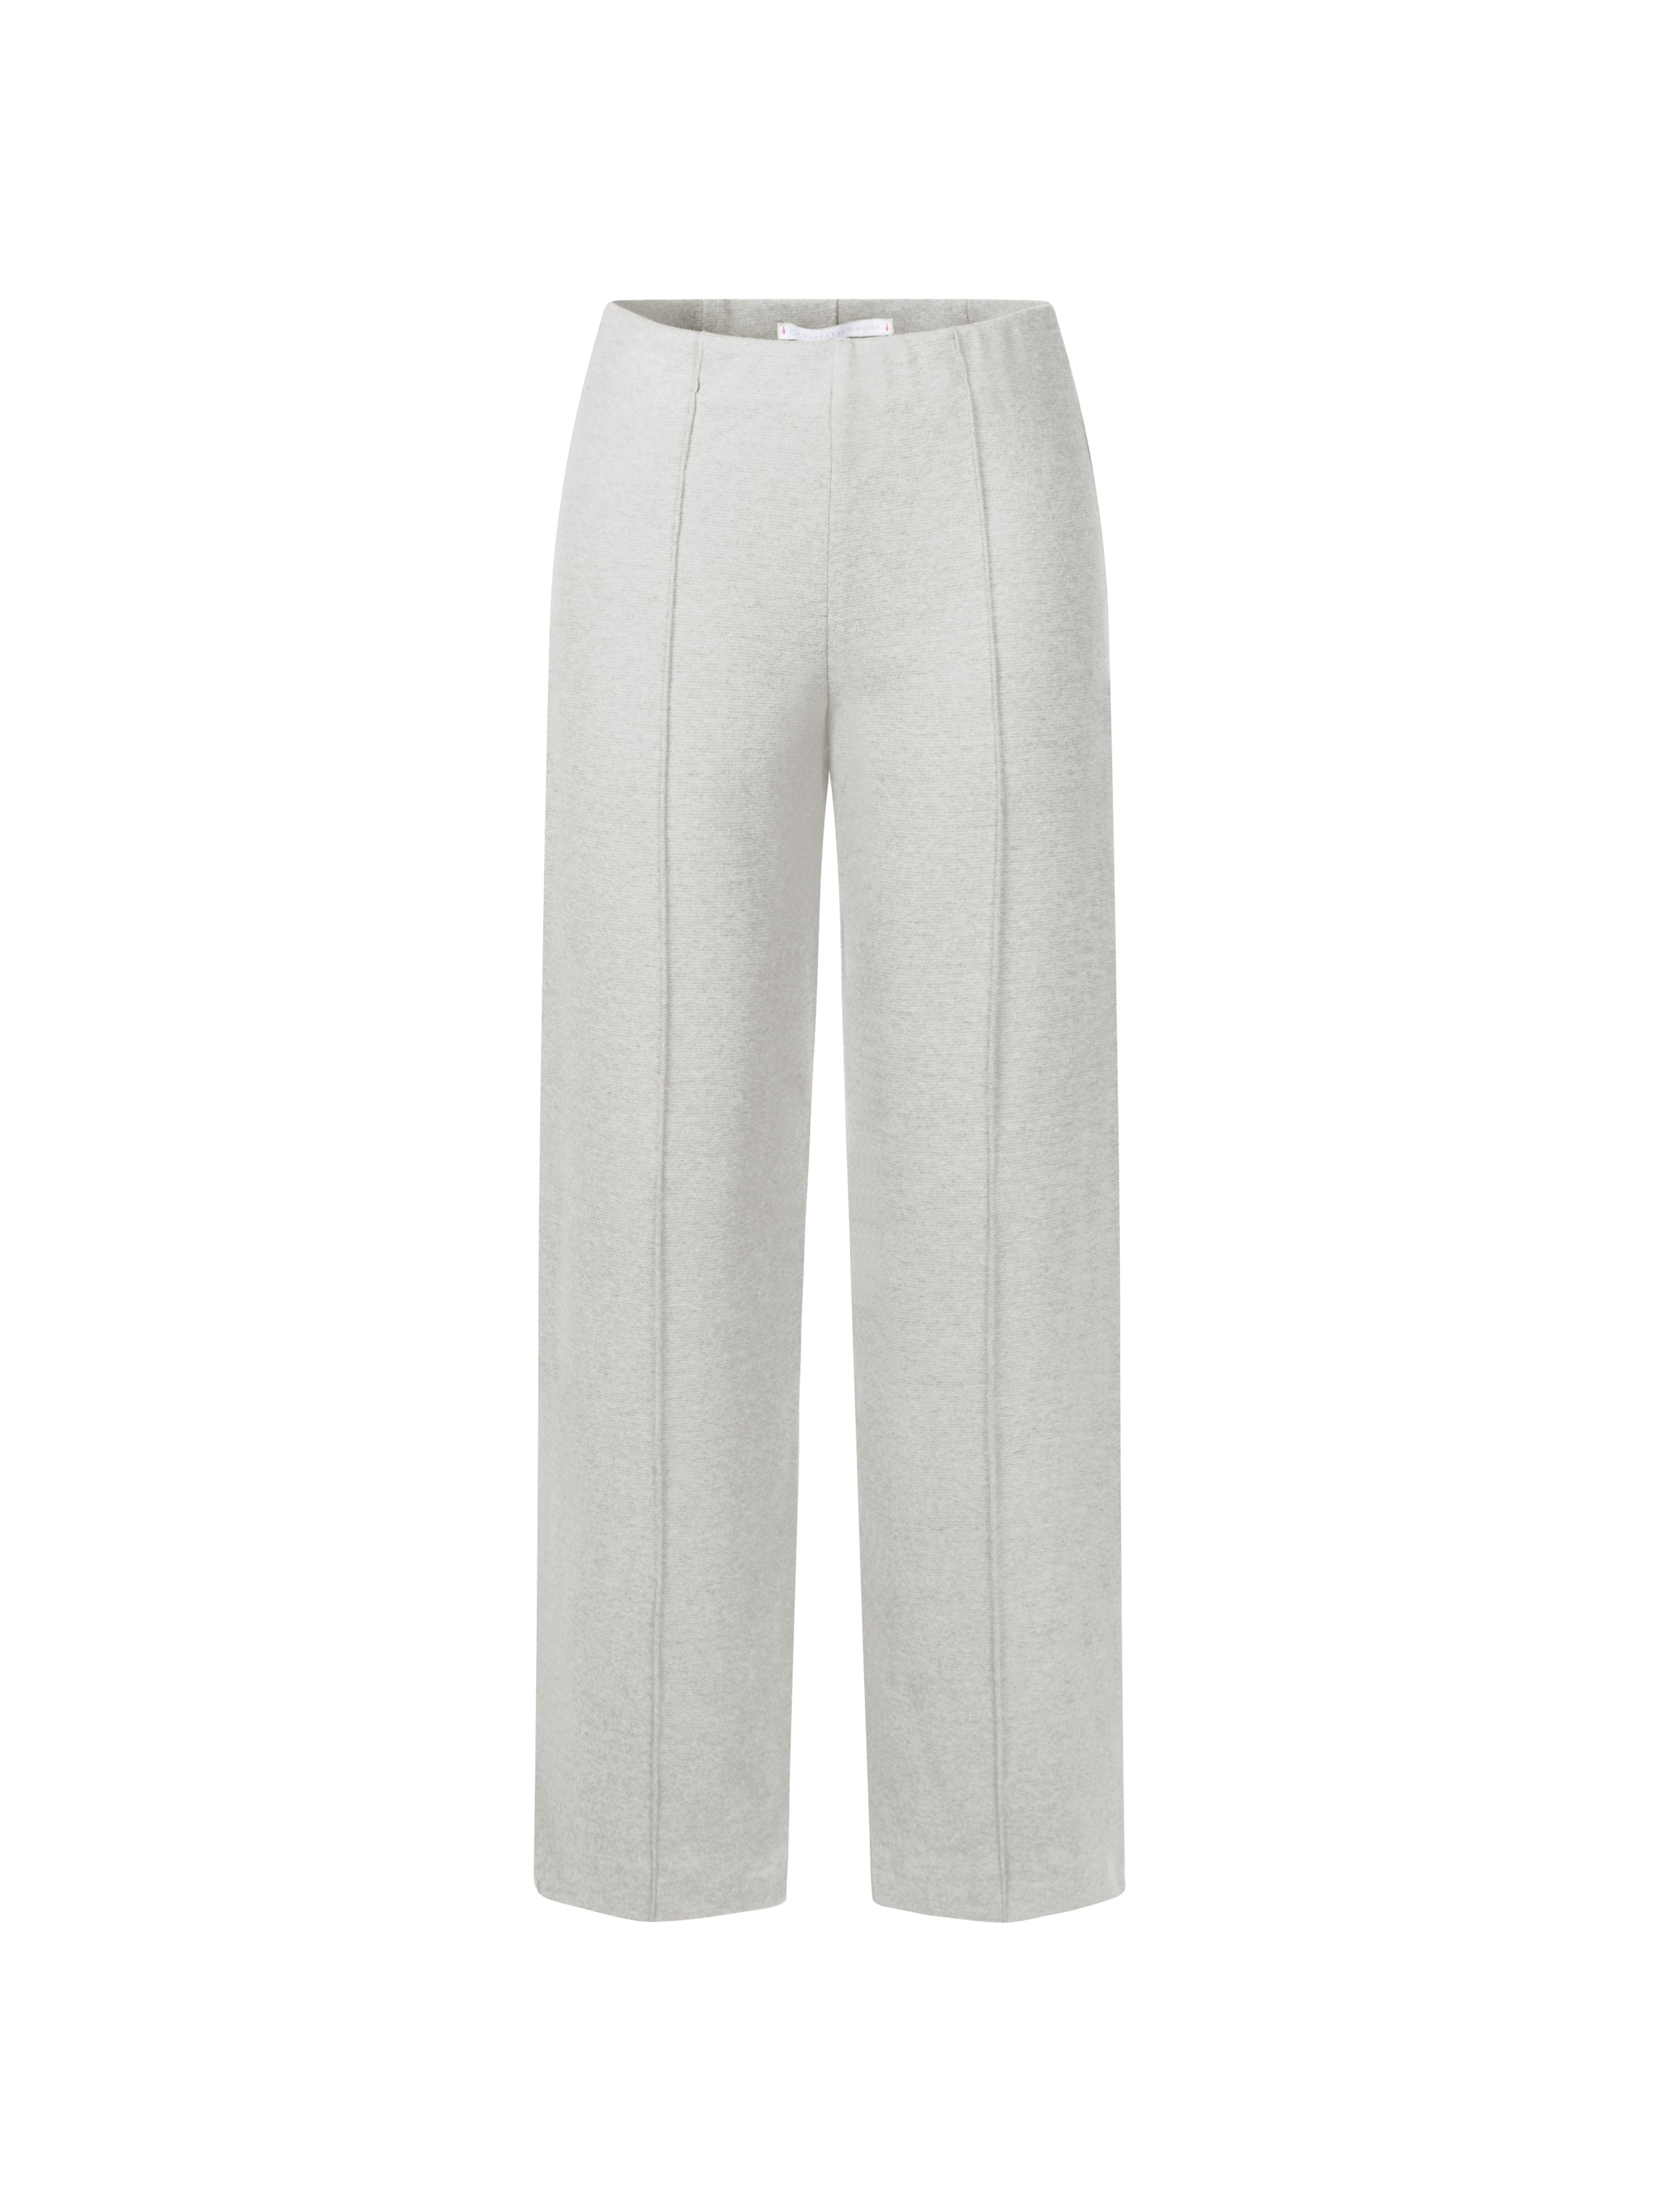 ELAINE FLANELL PANT PEARL